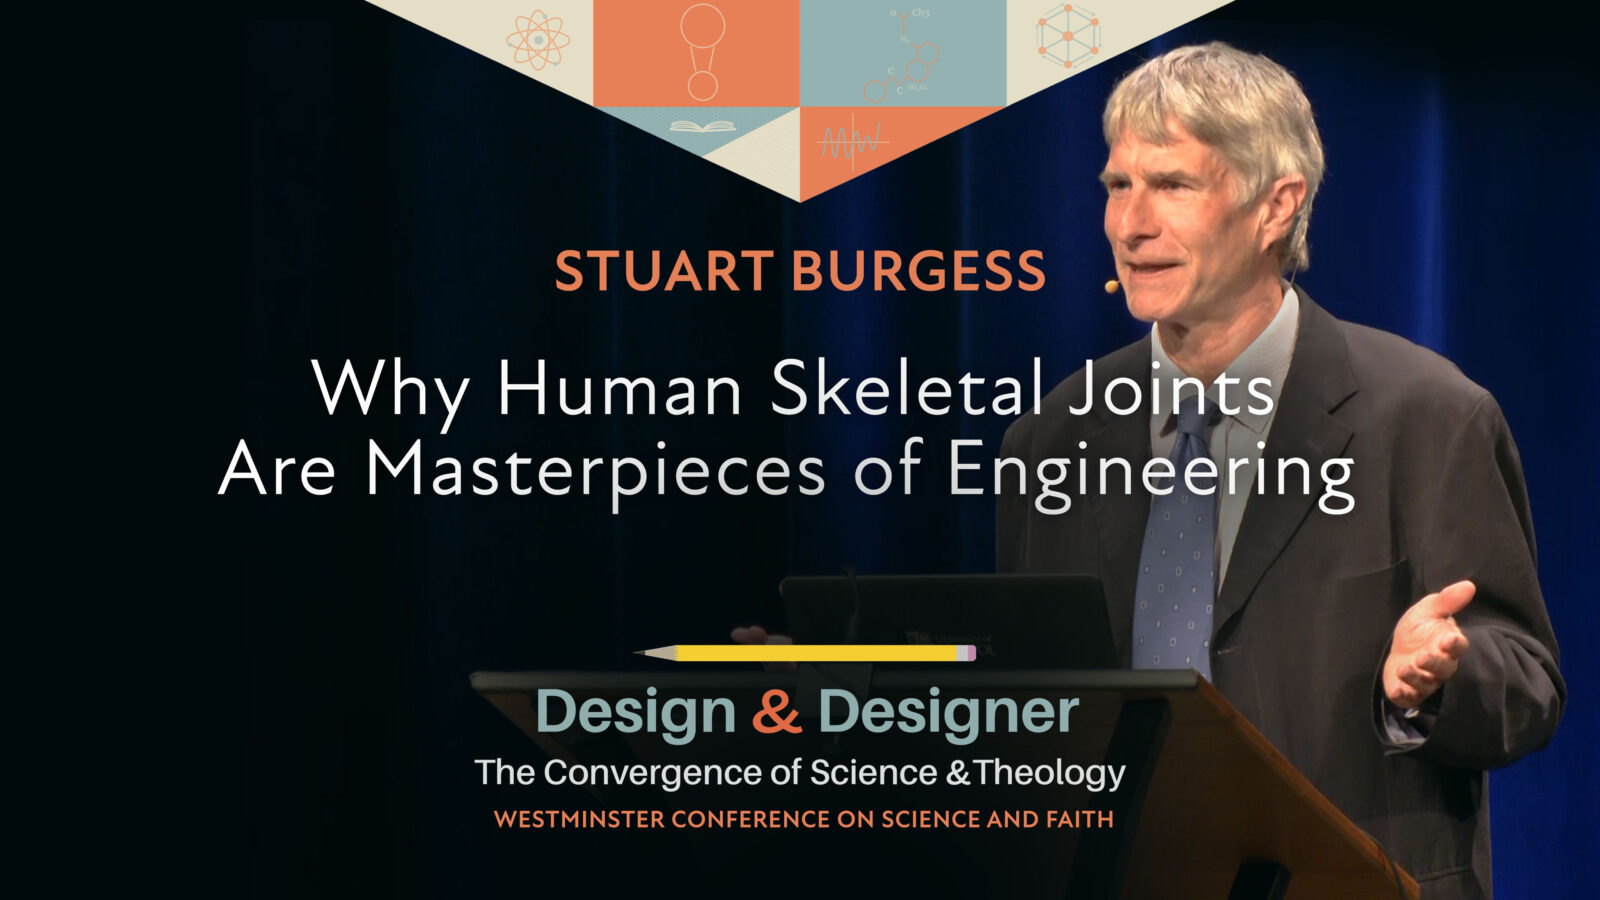 Stuart Burgess at Westminster Conference on Science and Faith 2022